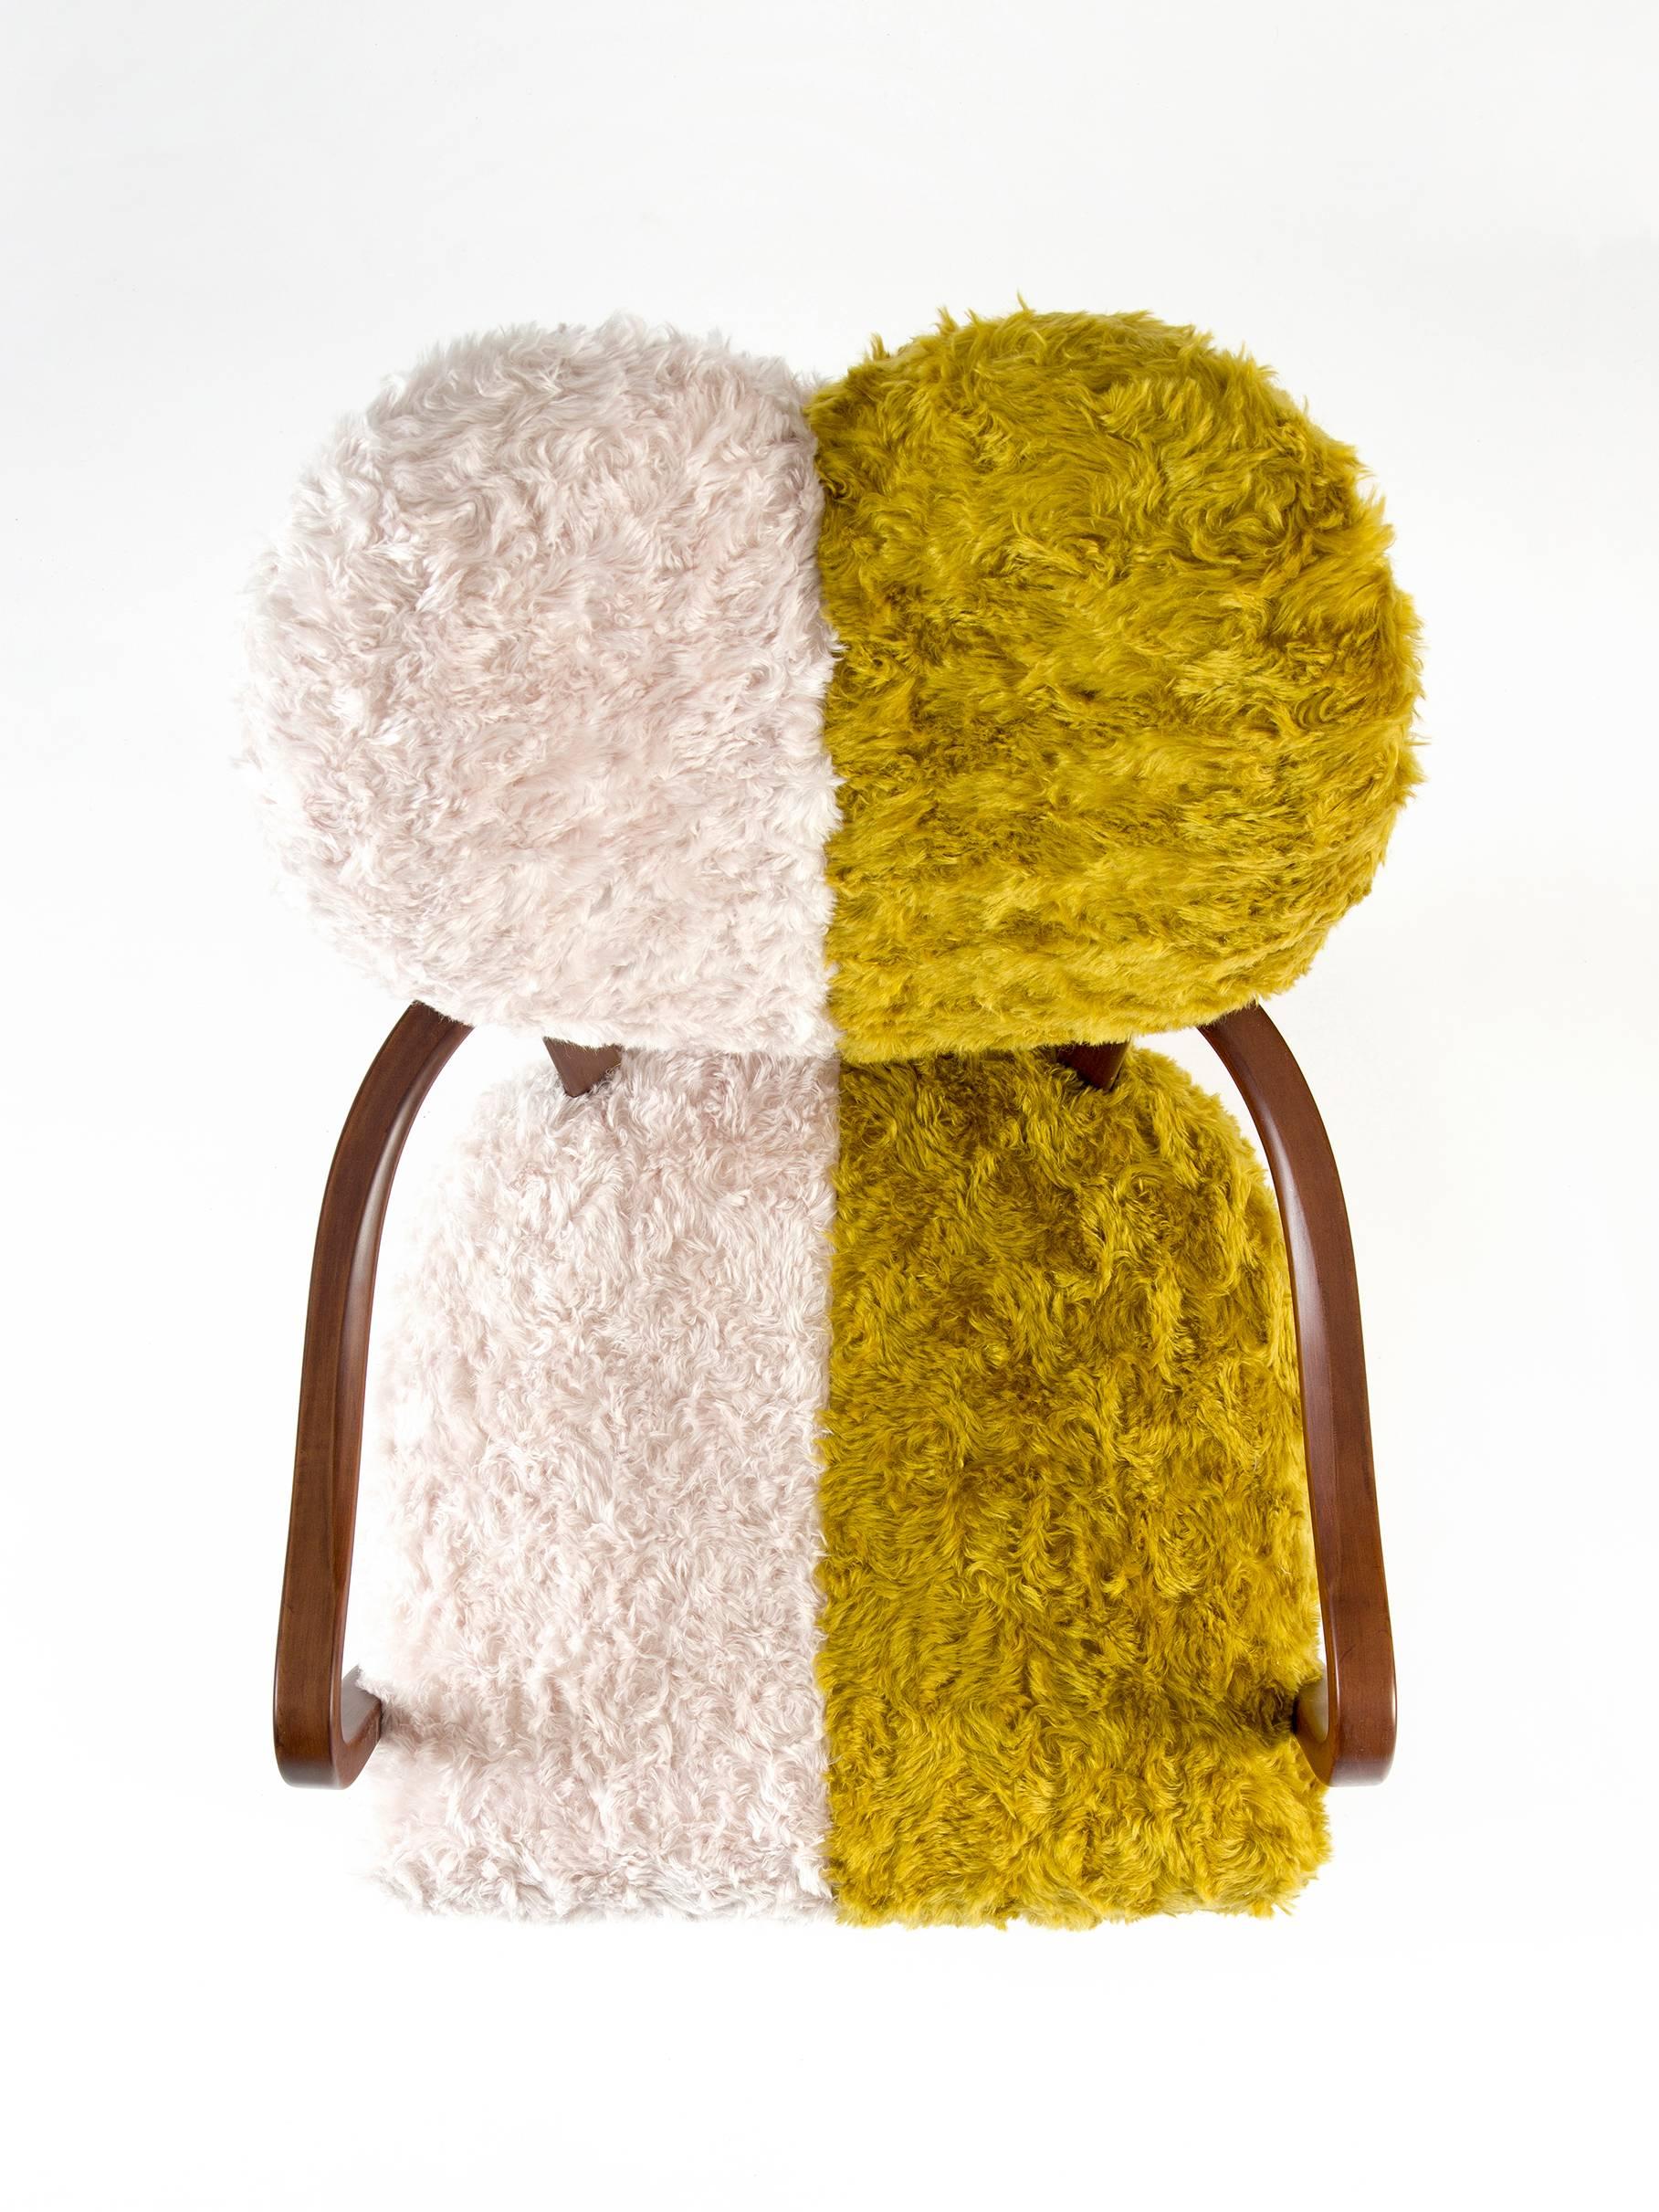 Contemporary Uni Armchair with Heart Shaped Back and Yellow and White Mohair In New Condition For Sale In New York, NY